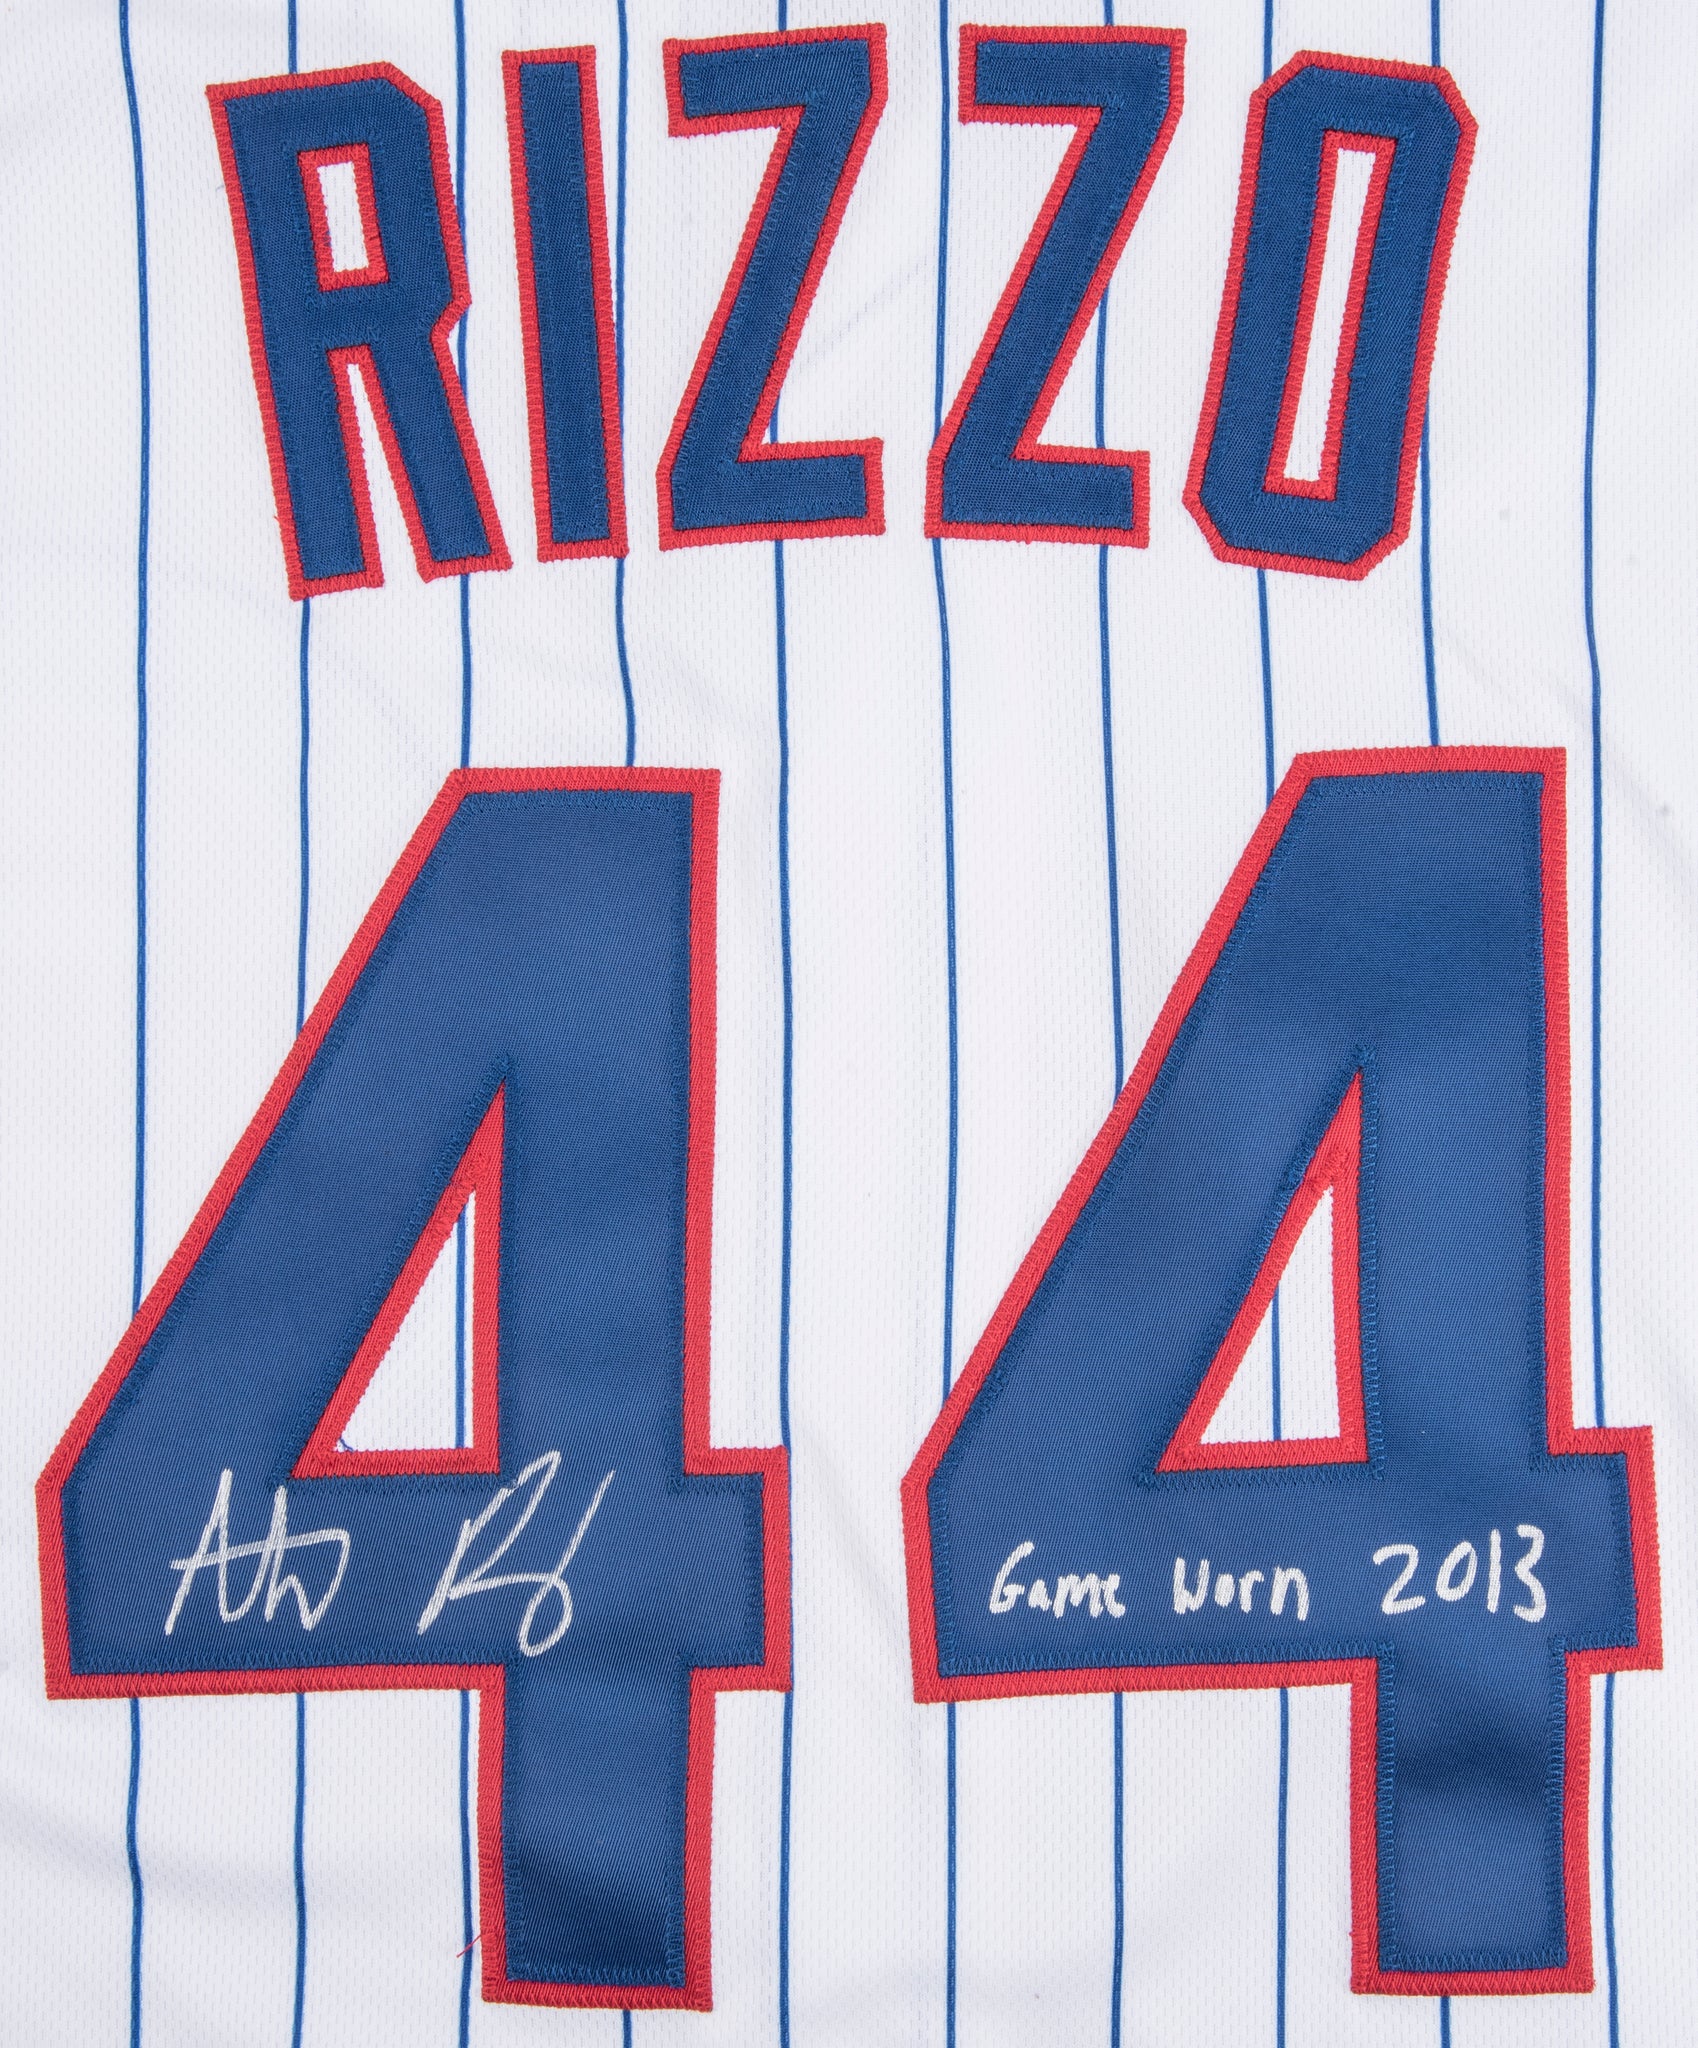 8/1/13 Anthony Rizzo Chicago Cubs Two Home-Run Game Worn Jersey